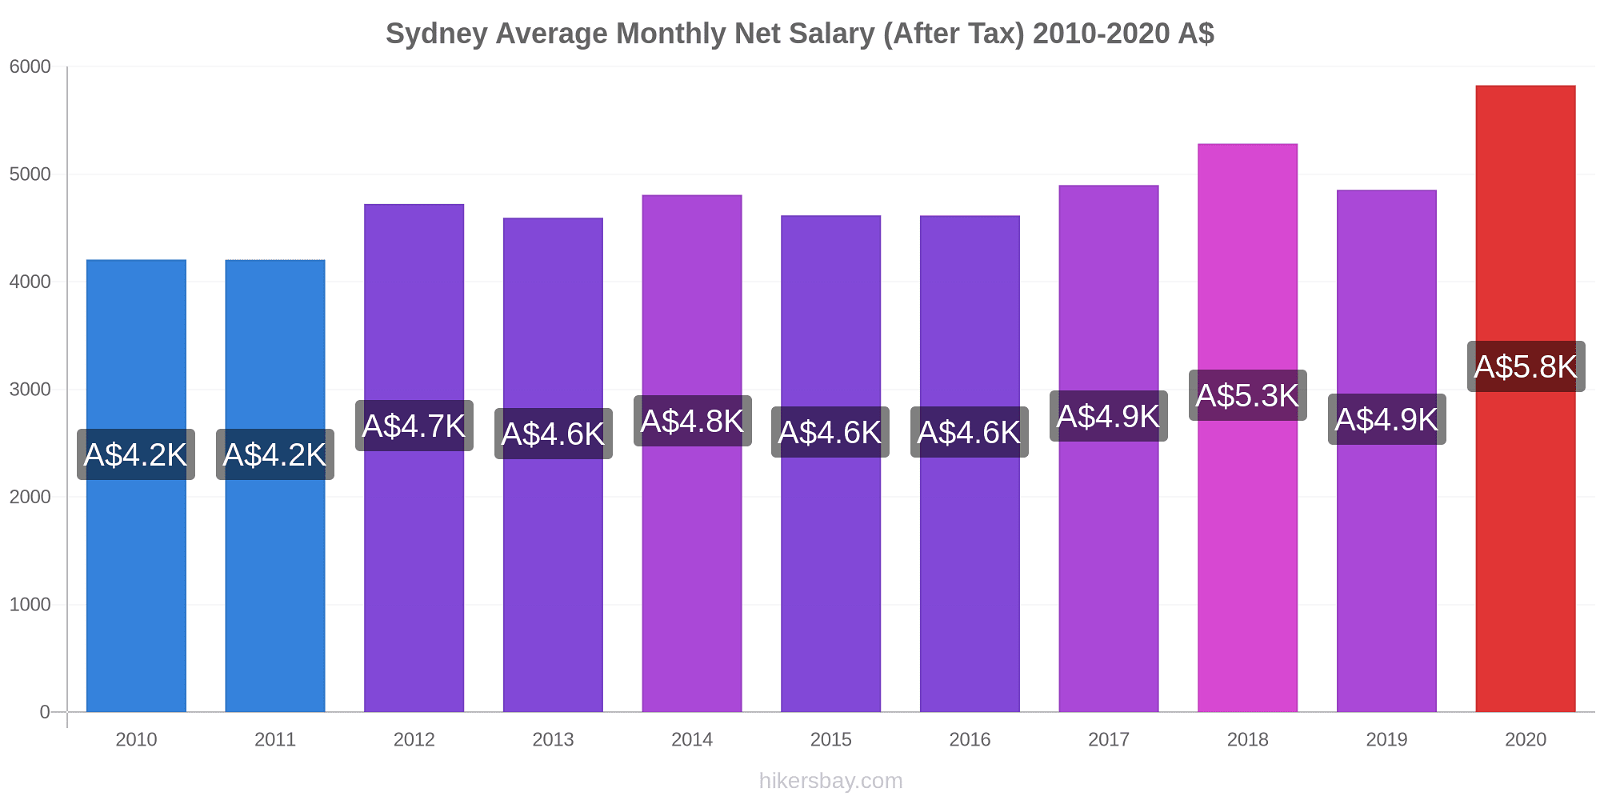 Sydney price changes Average Monthly Net Salary (After Tax) hikersbay.com